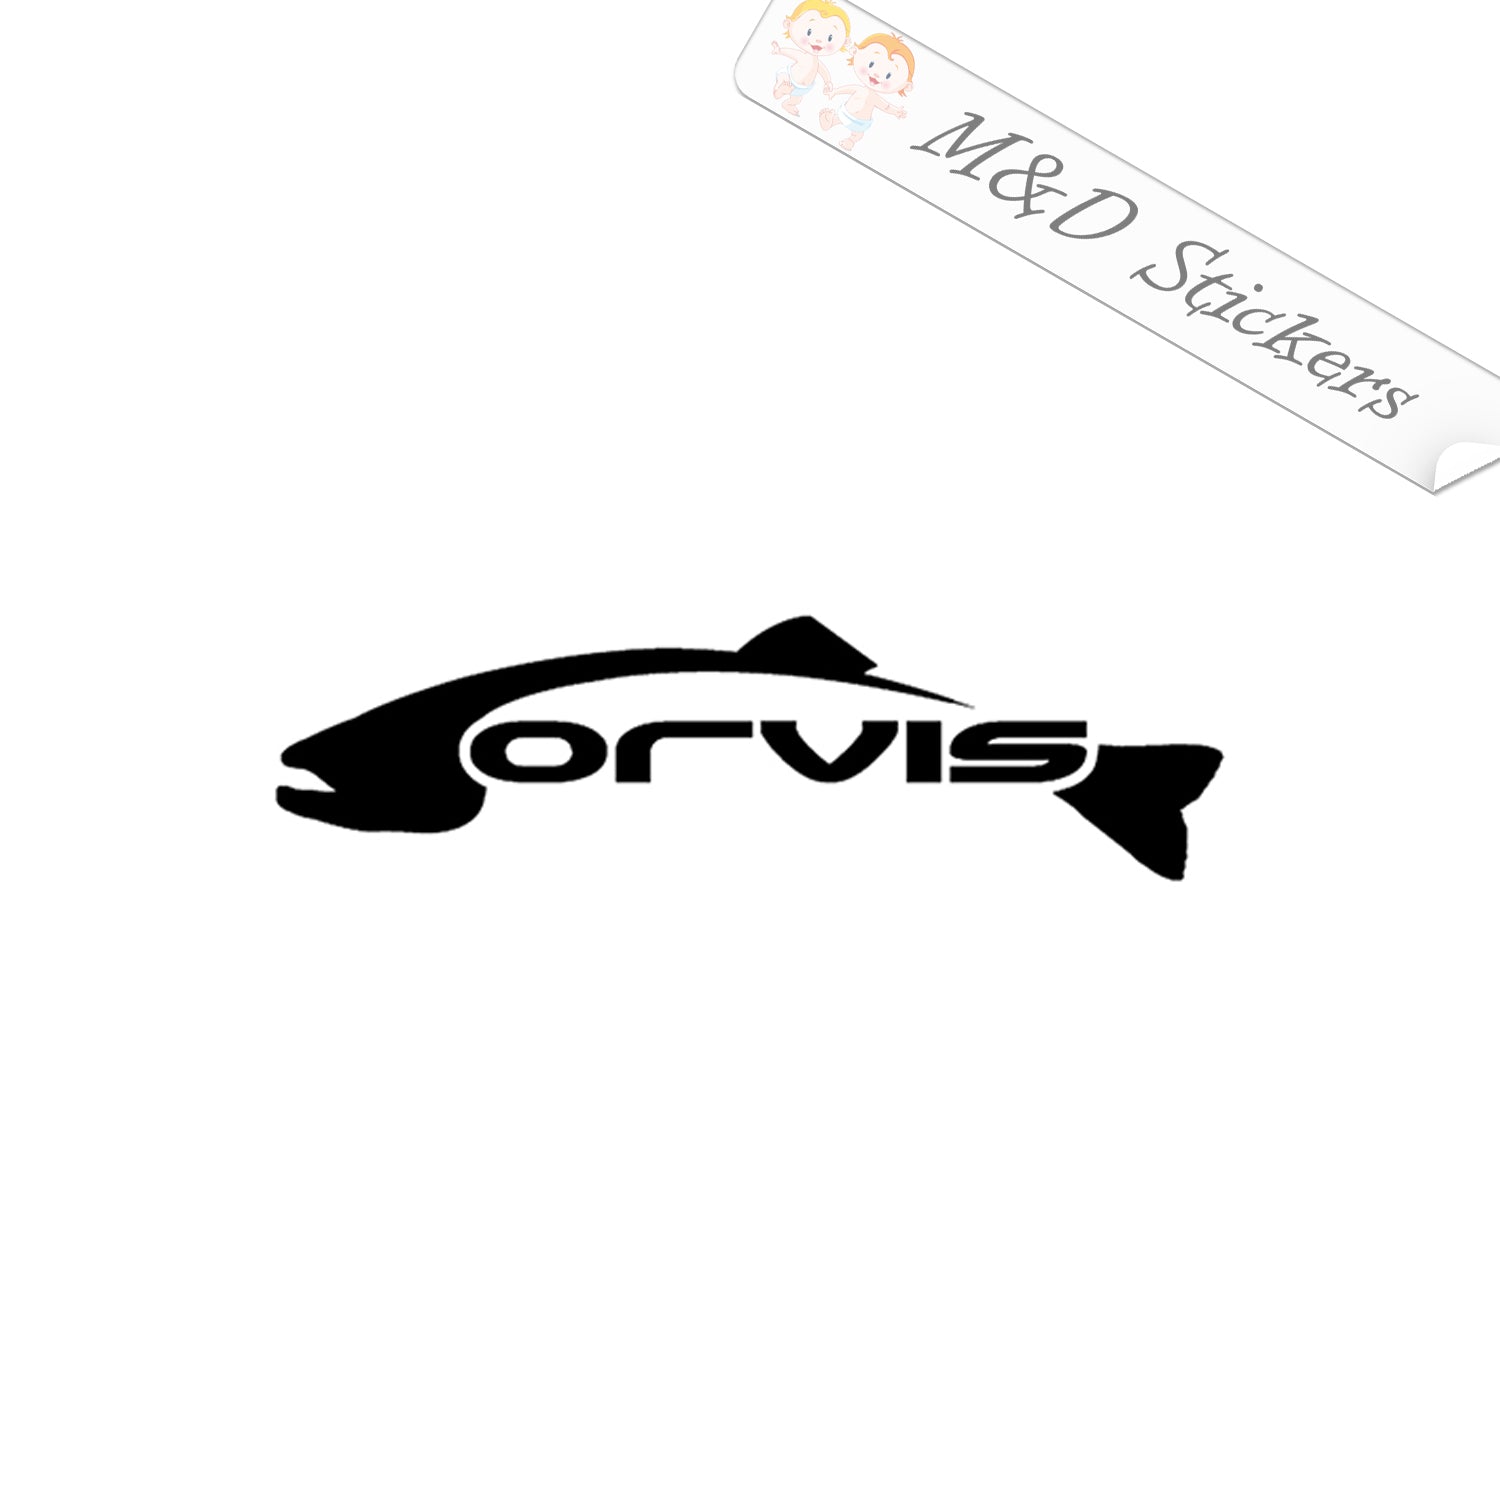 fishing logo stickers, fishing logo stickers Suppliers and Manufacturers at